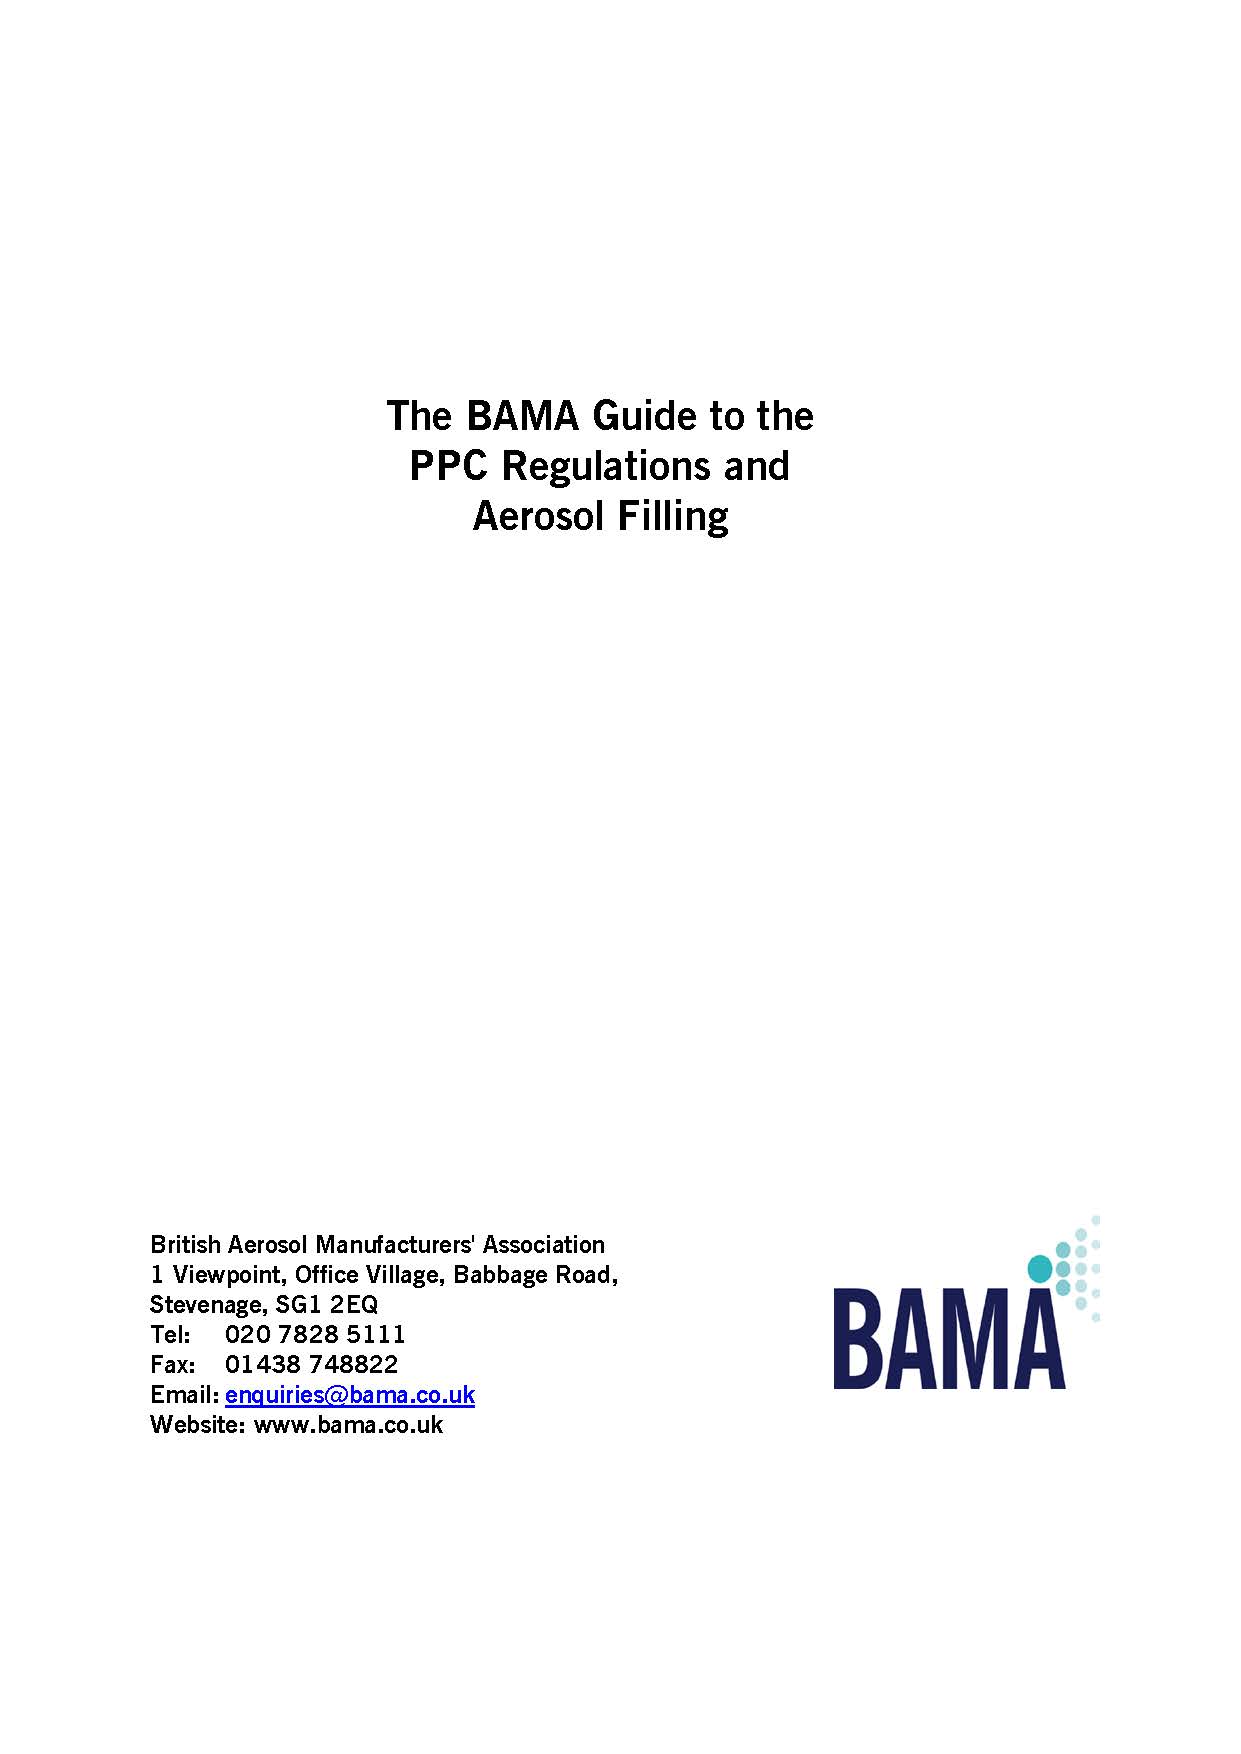 BAMA Guide to the PPC Regulations and Aerosol Filling - AVAILABLE SOON